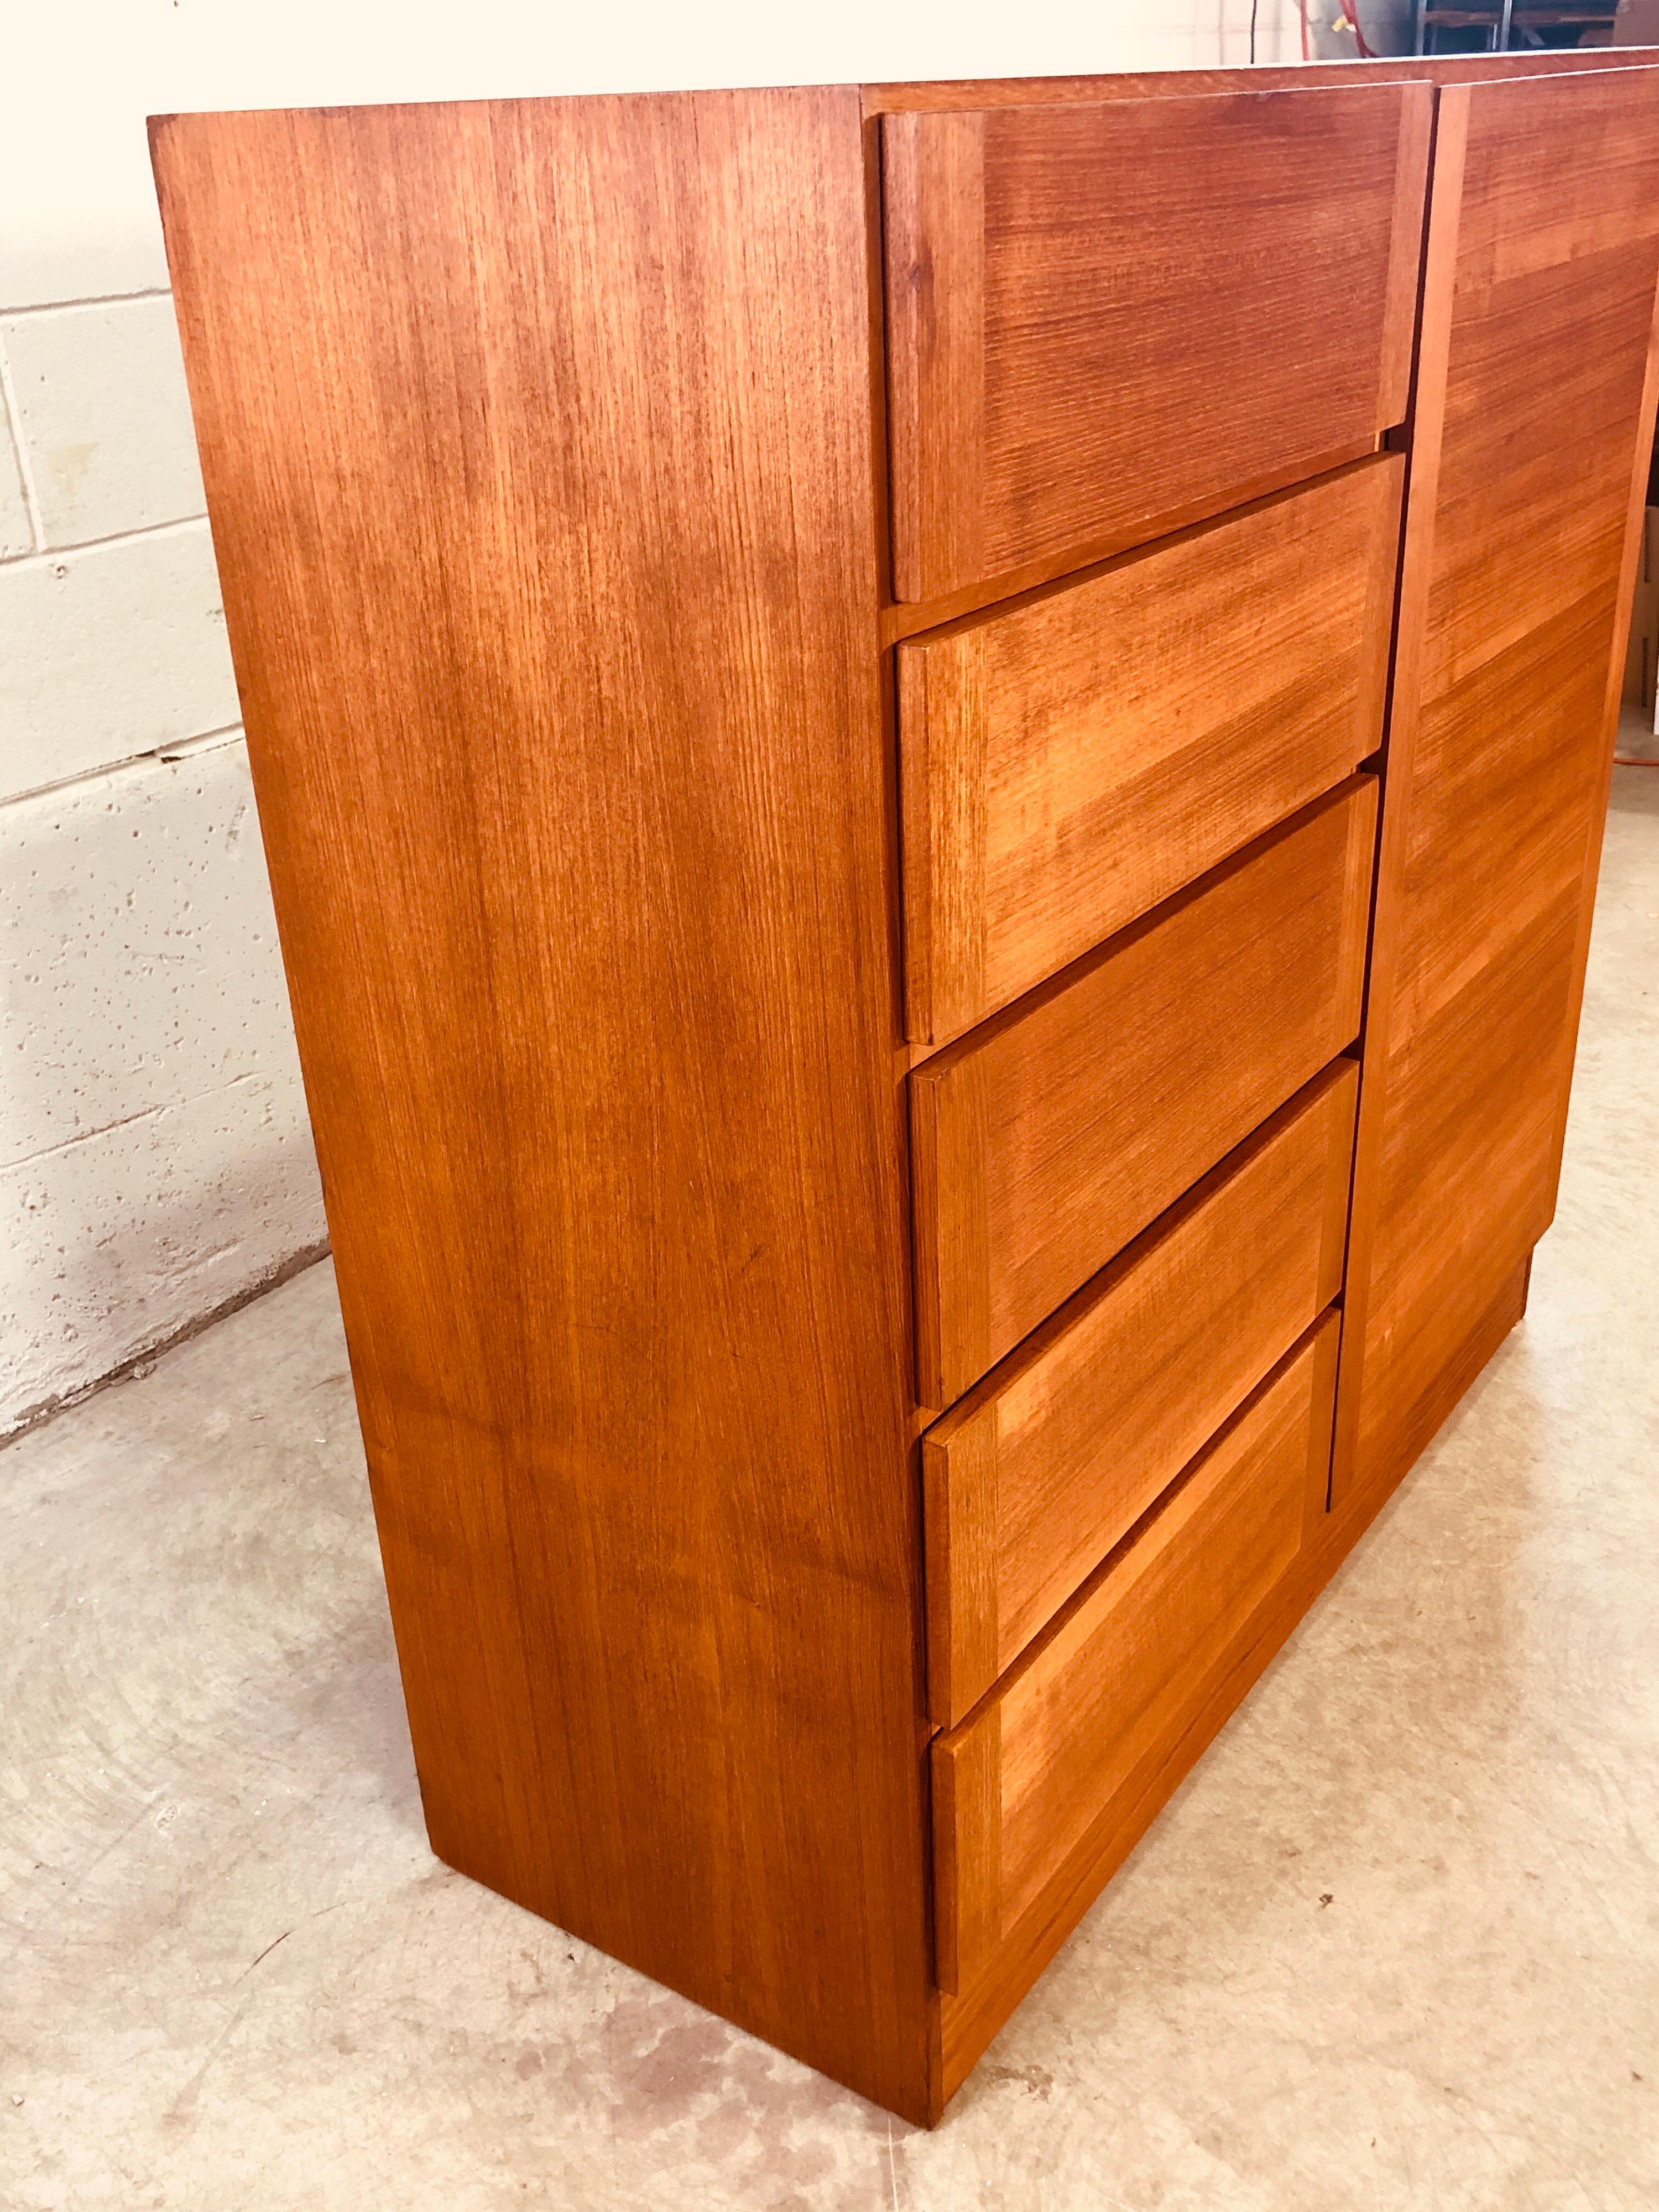 Vintage Danish Teak Wardrobe Armoire In Good Condition For Sale In Amherst, NH